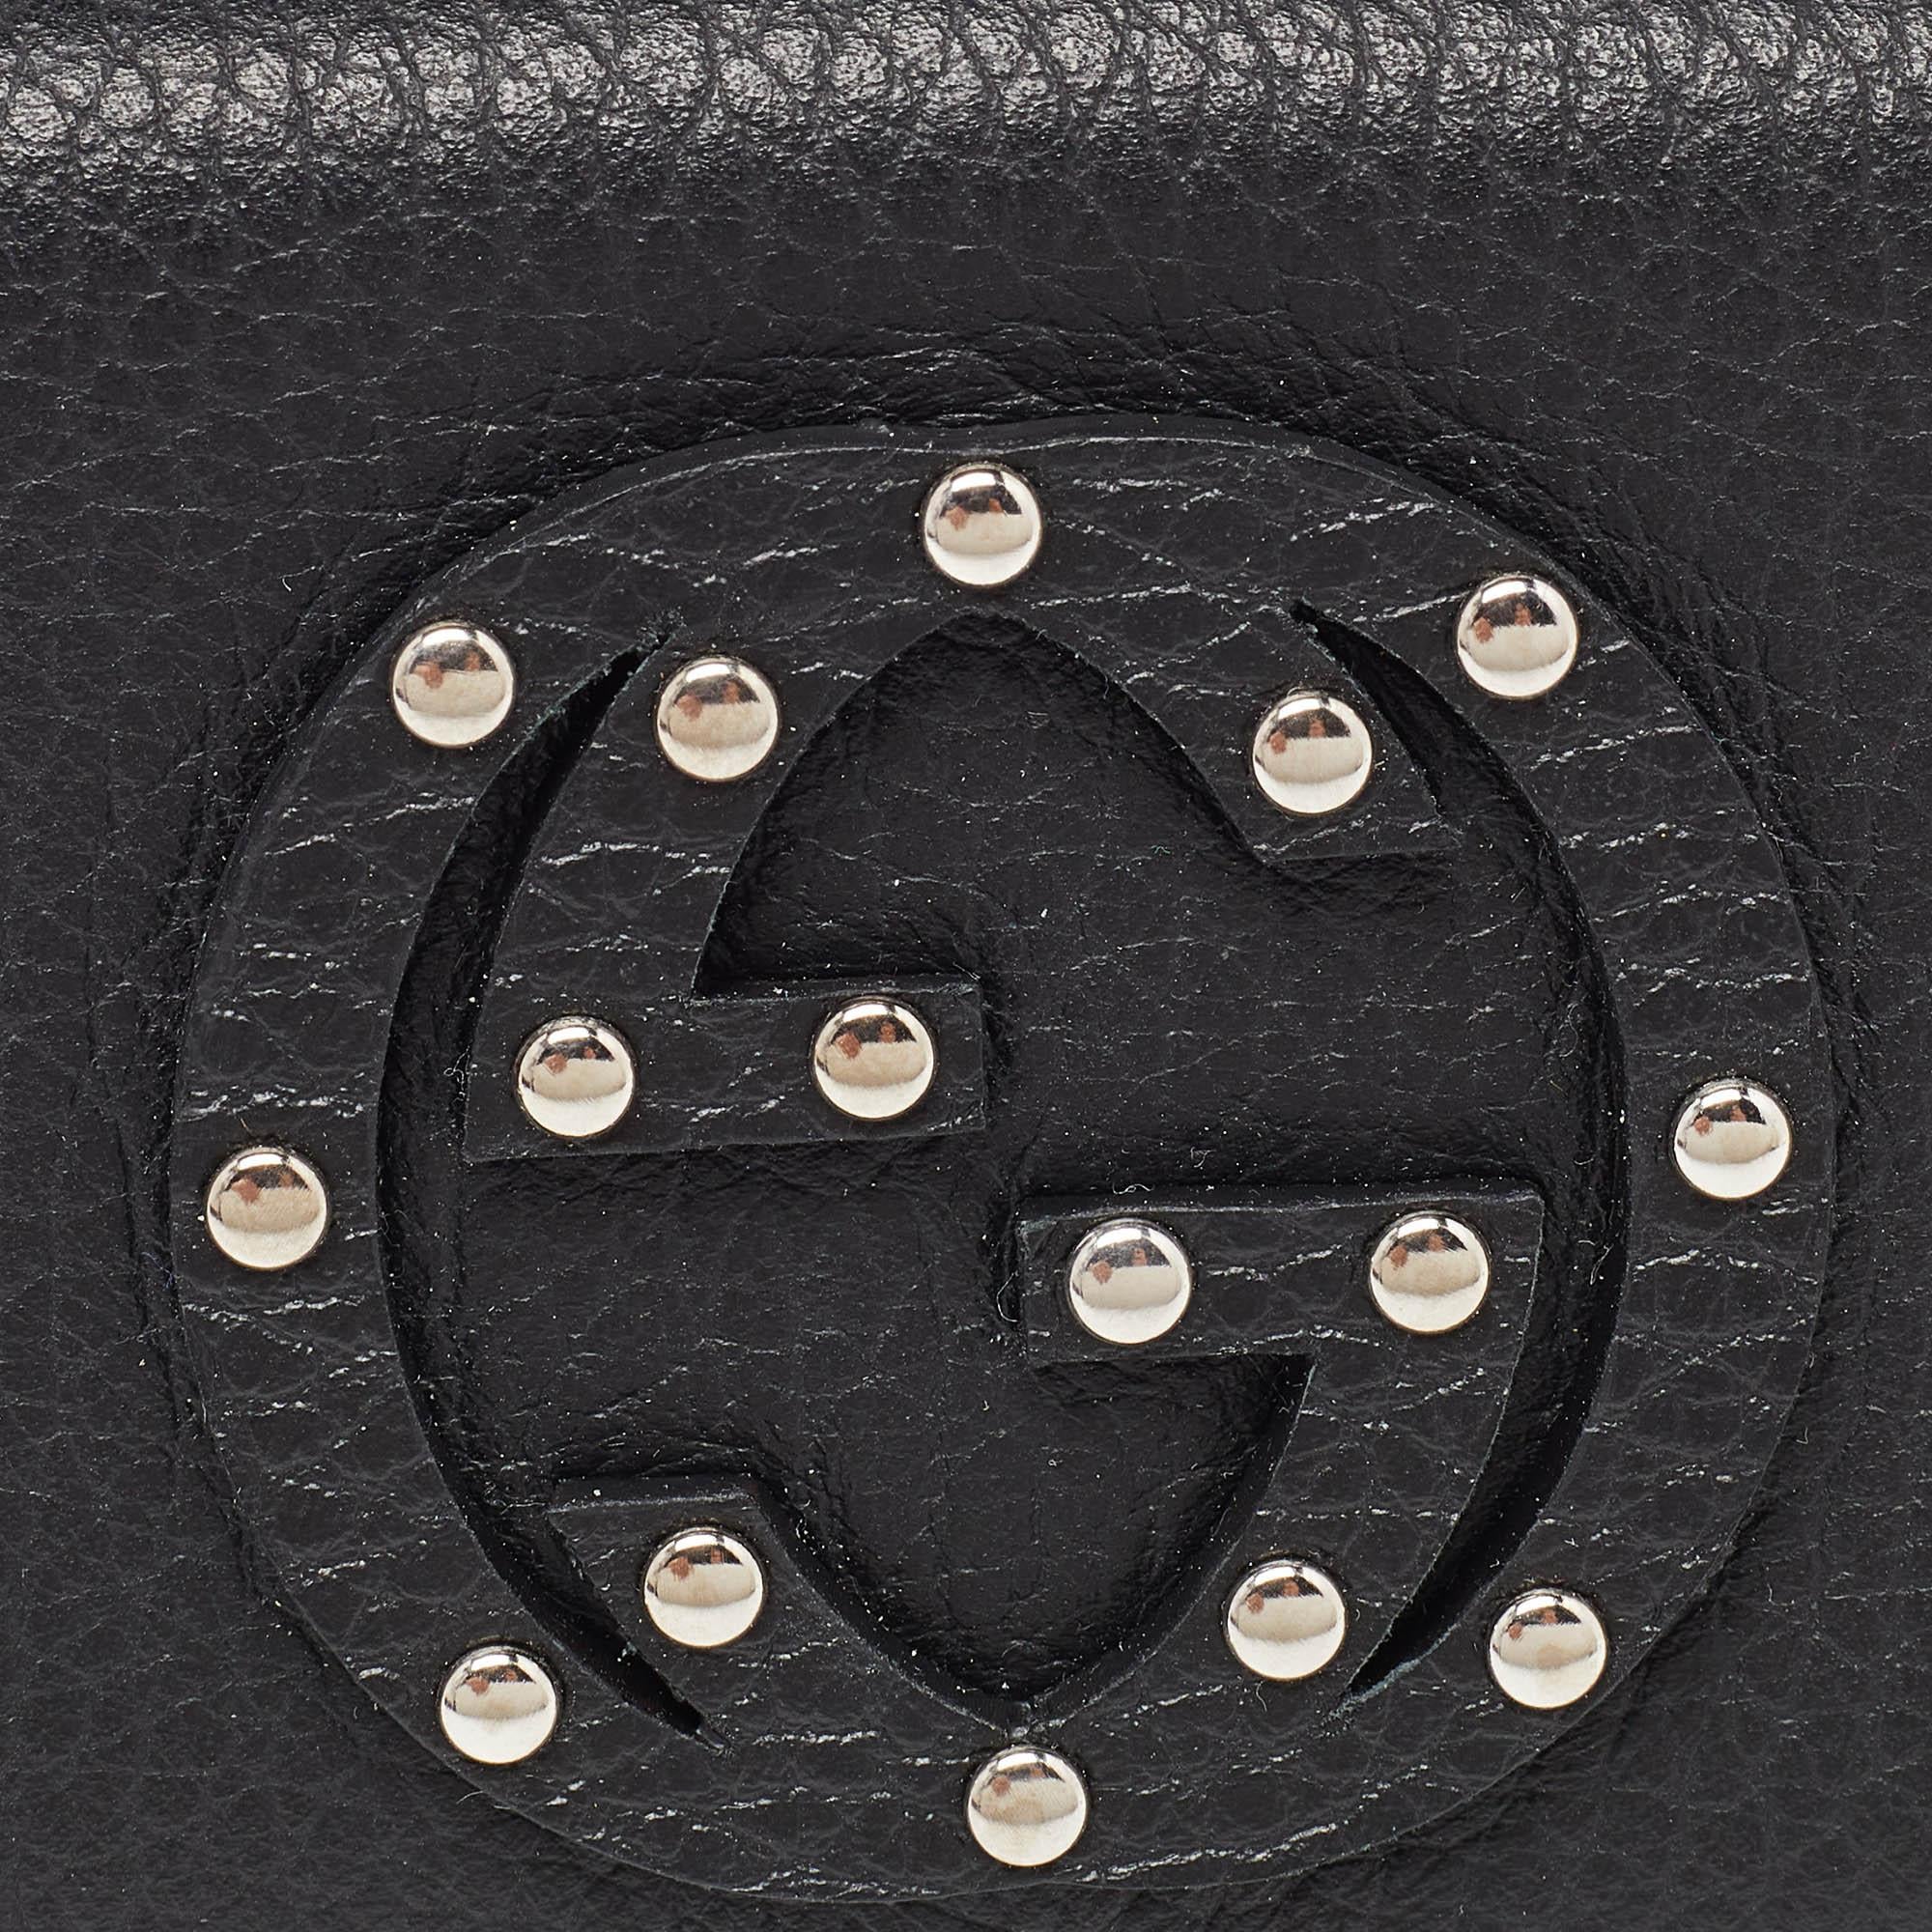 Gucci Black Leather Soho Studded Continental Wallet In Excellent Condition For Sale In Dubai, Al Qouz 2